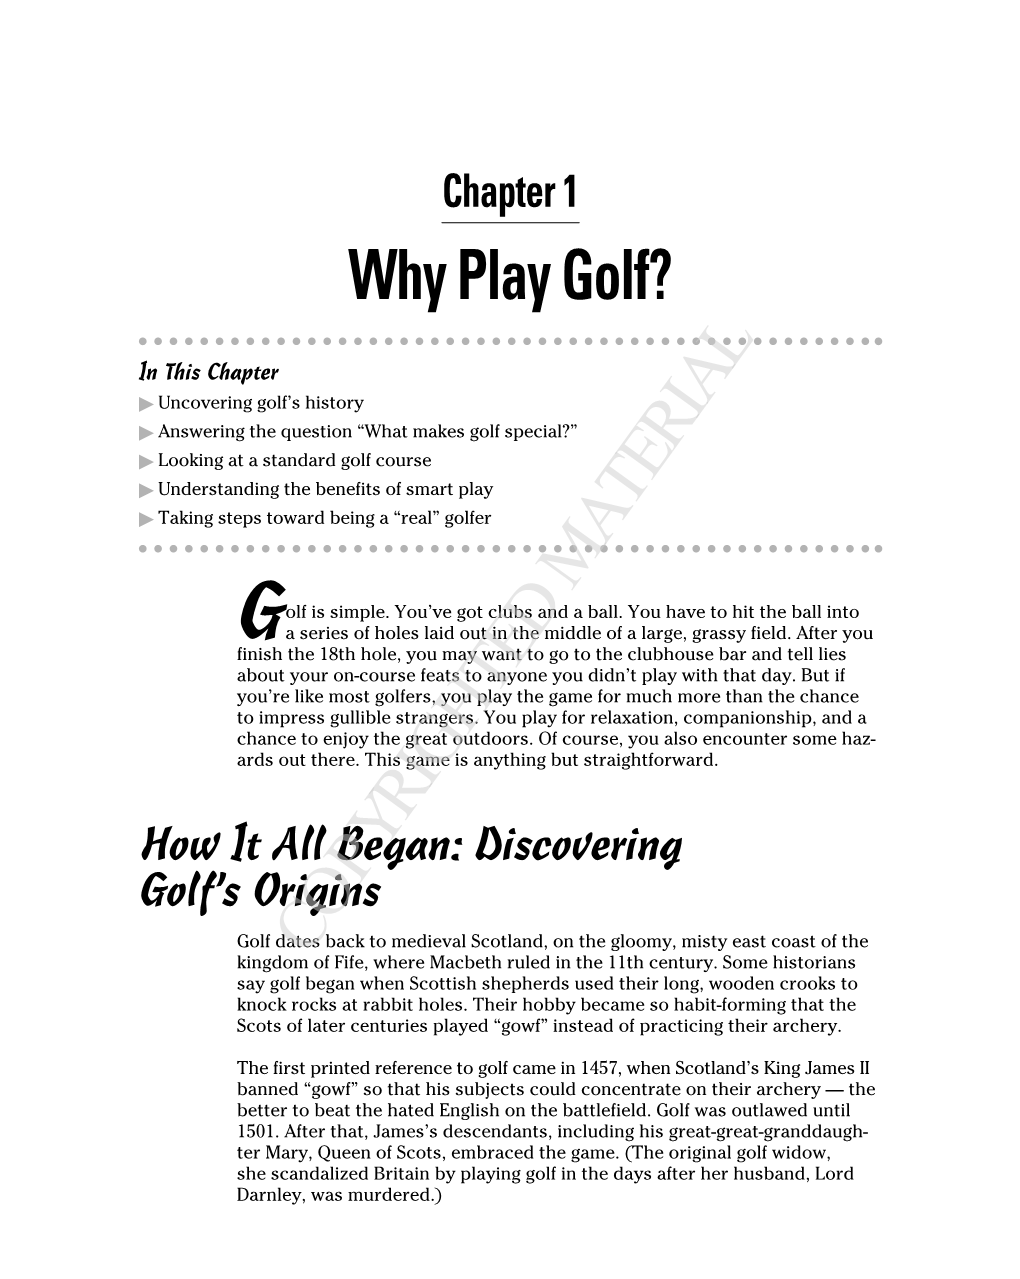 Why Play Golf?